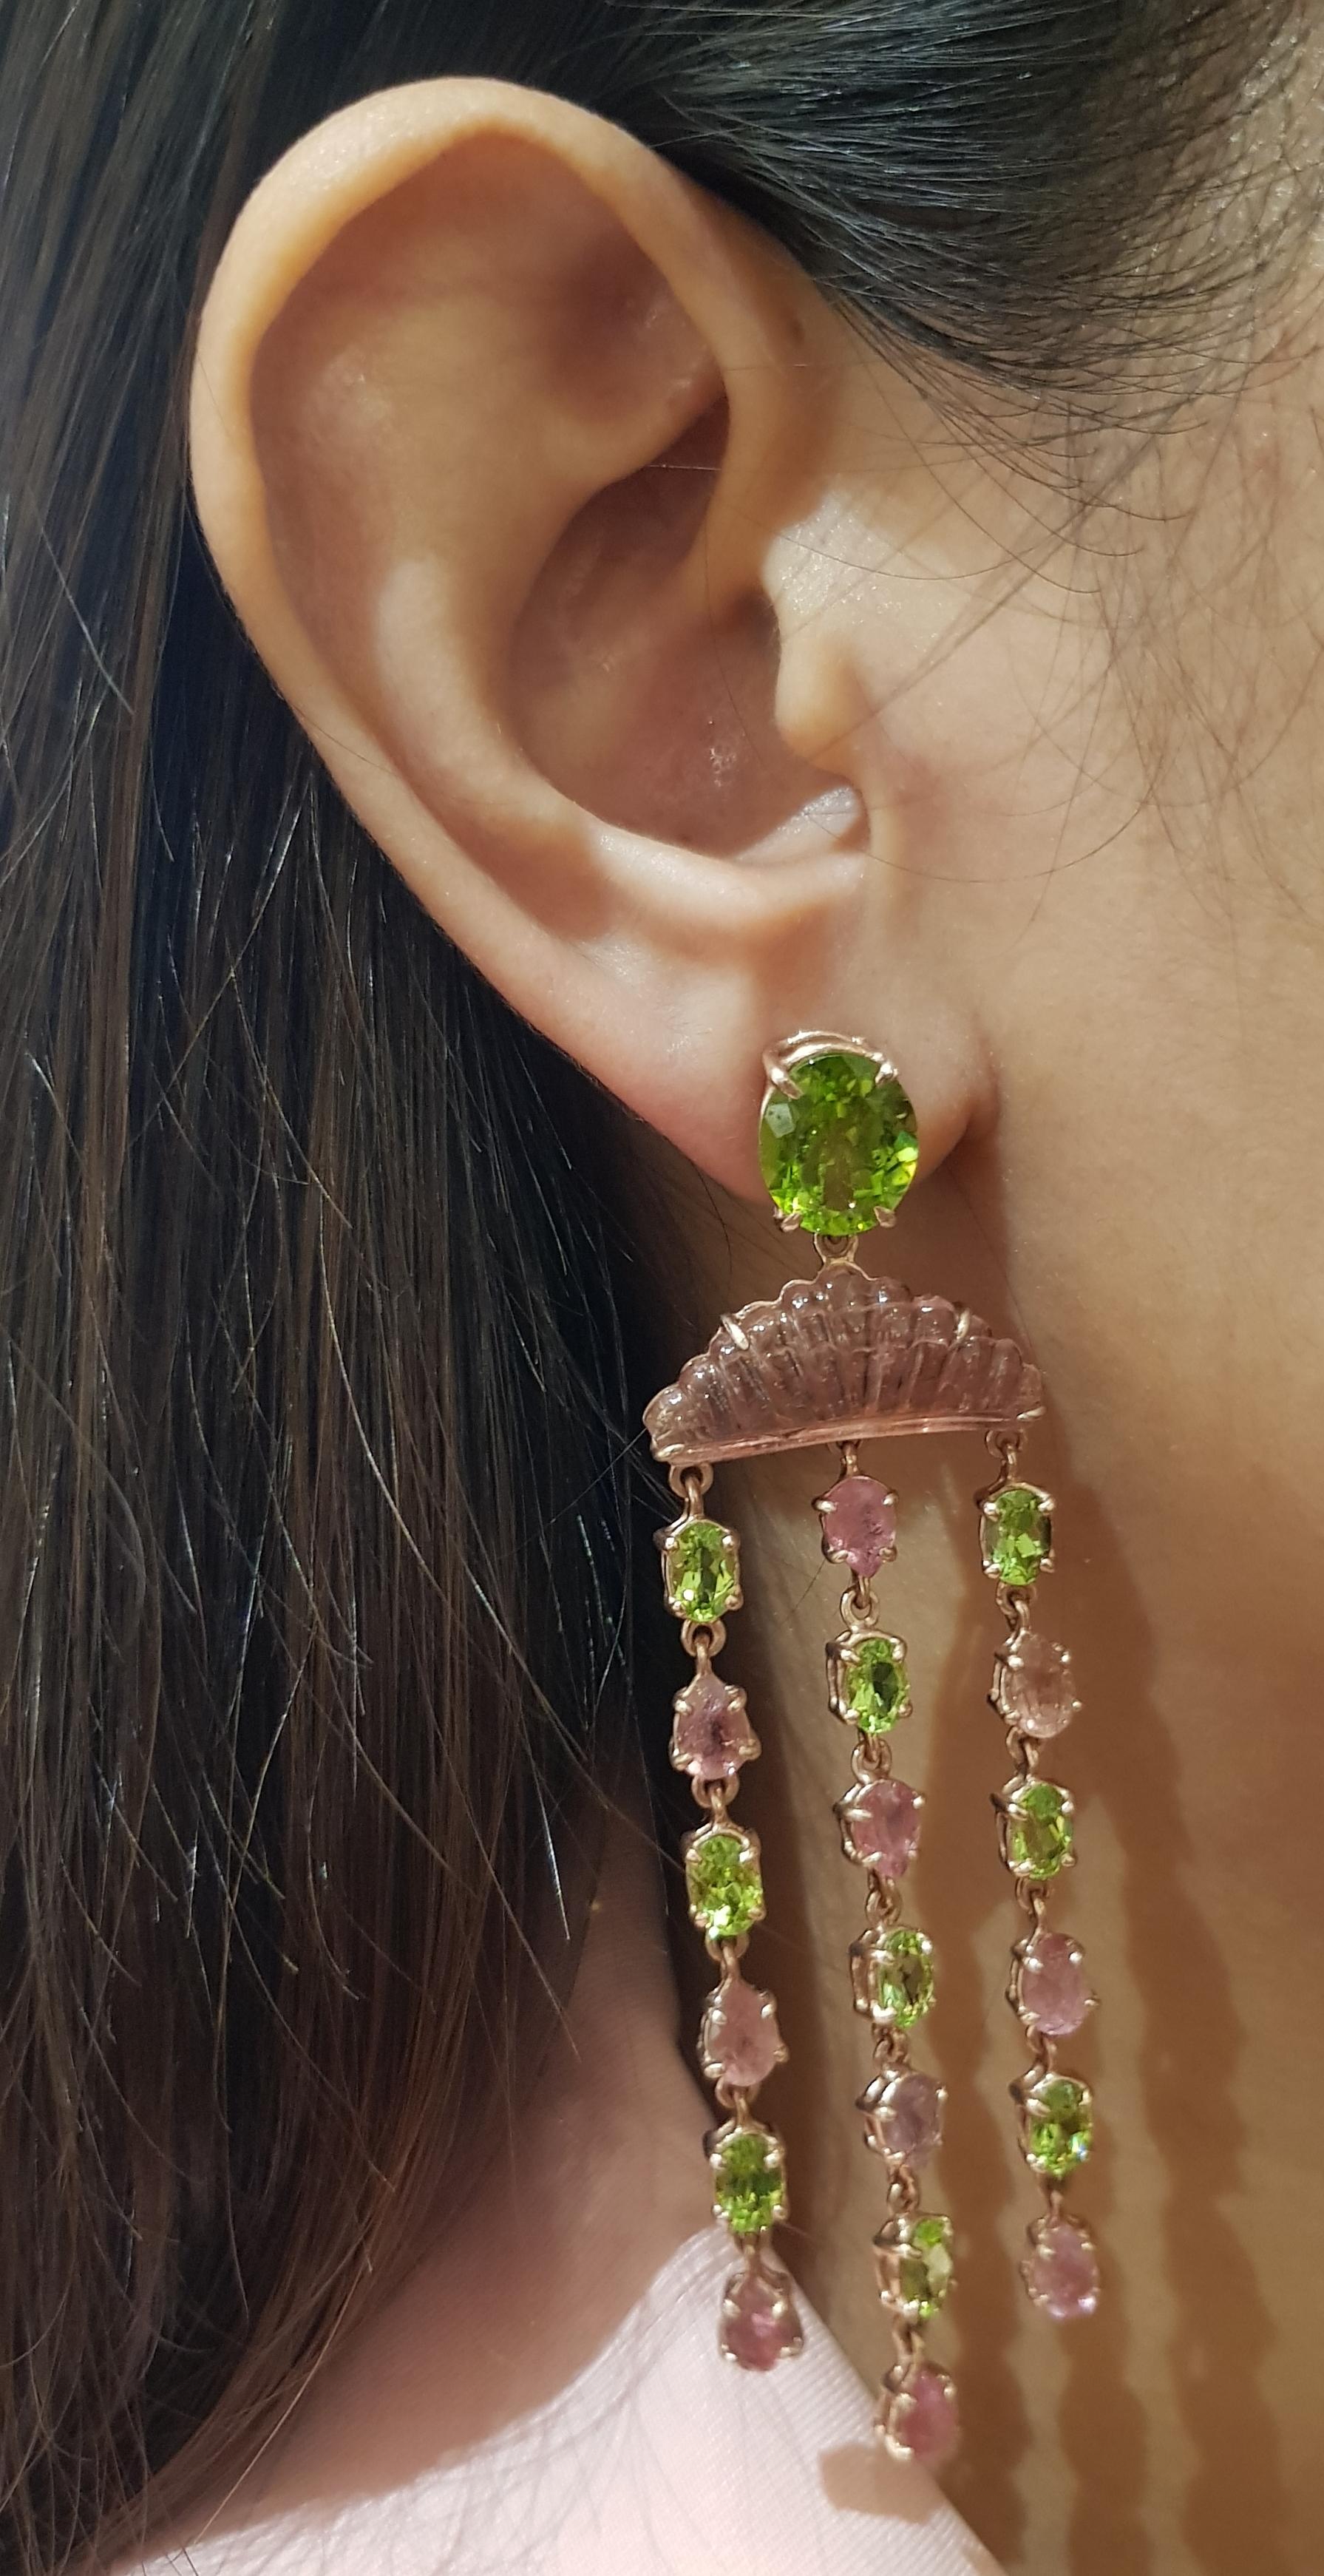 Tourmaline and Peridot Earrings set in Silver Settings

Width:  2.4 cm 
Length: 8.8 cm
Total Weight: 23.89 grams

*Please note that the silver setting is plated with gold and rhodium to promote shine and help prevent oxidation.  However, with the